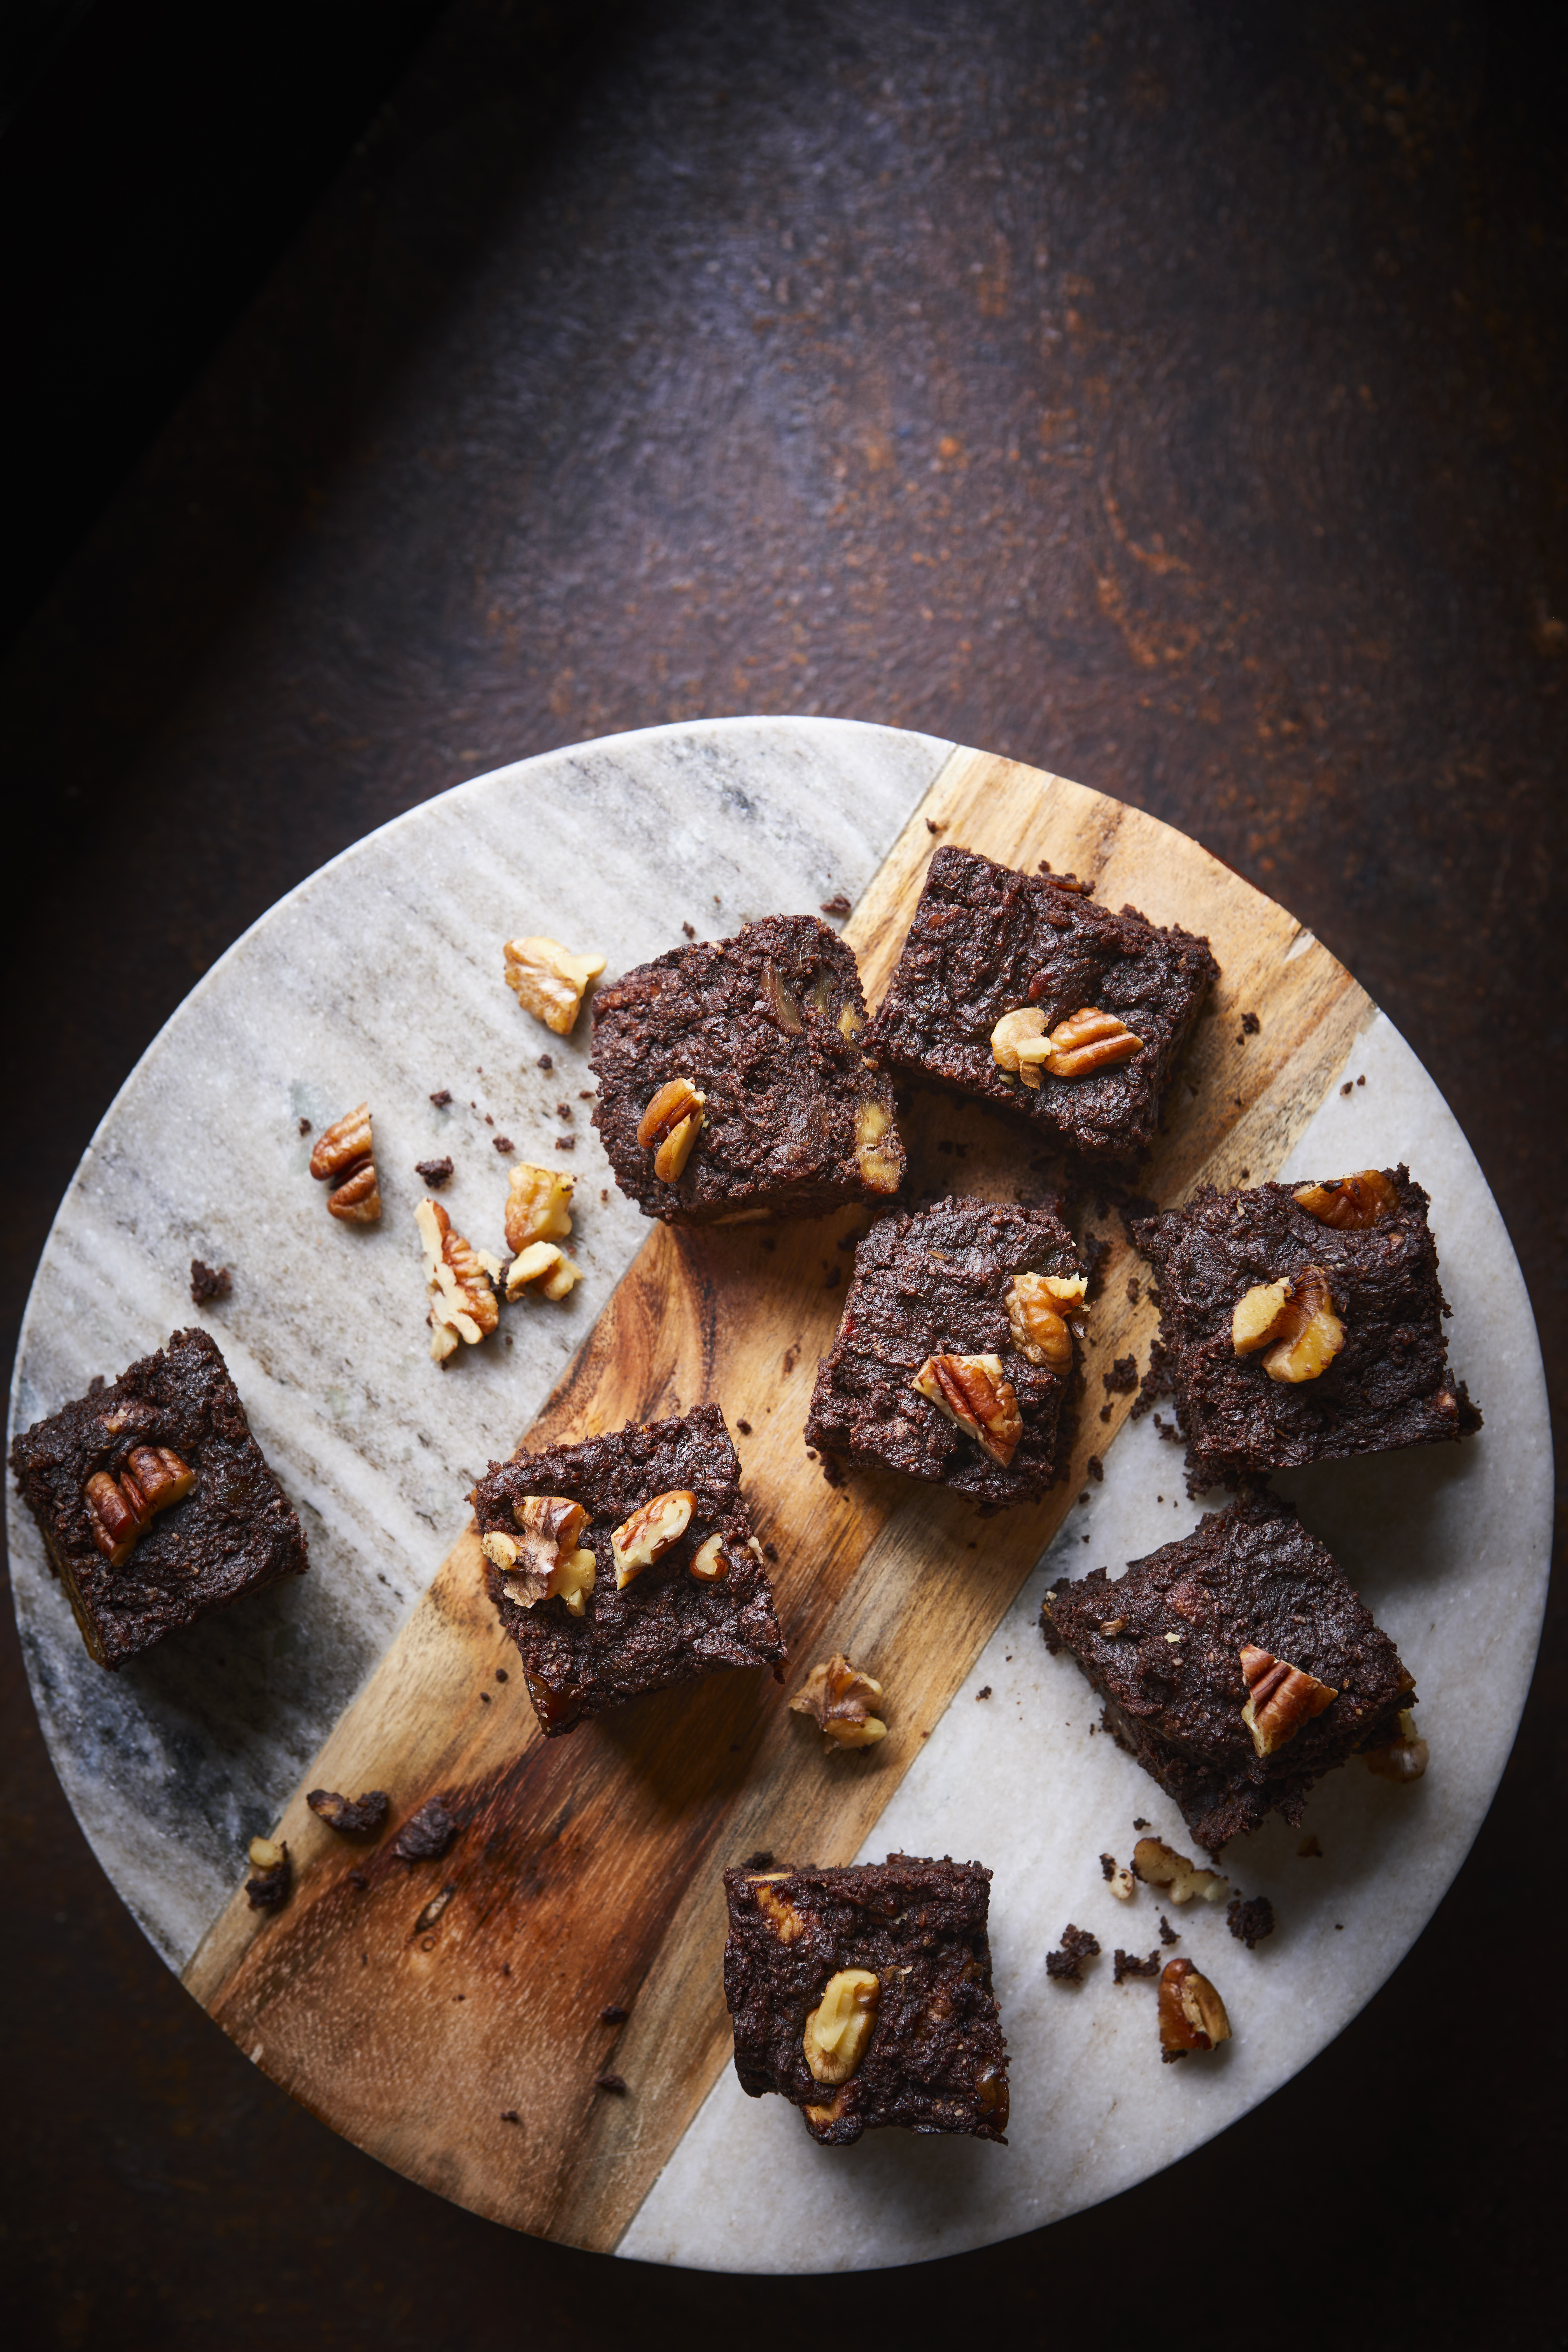 Chocolate, date and walnut brownies from The Diabetes Weight-Loss Plan